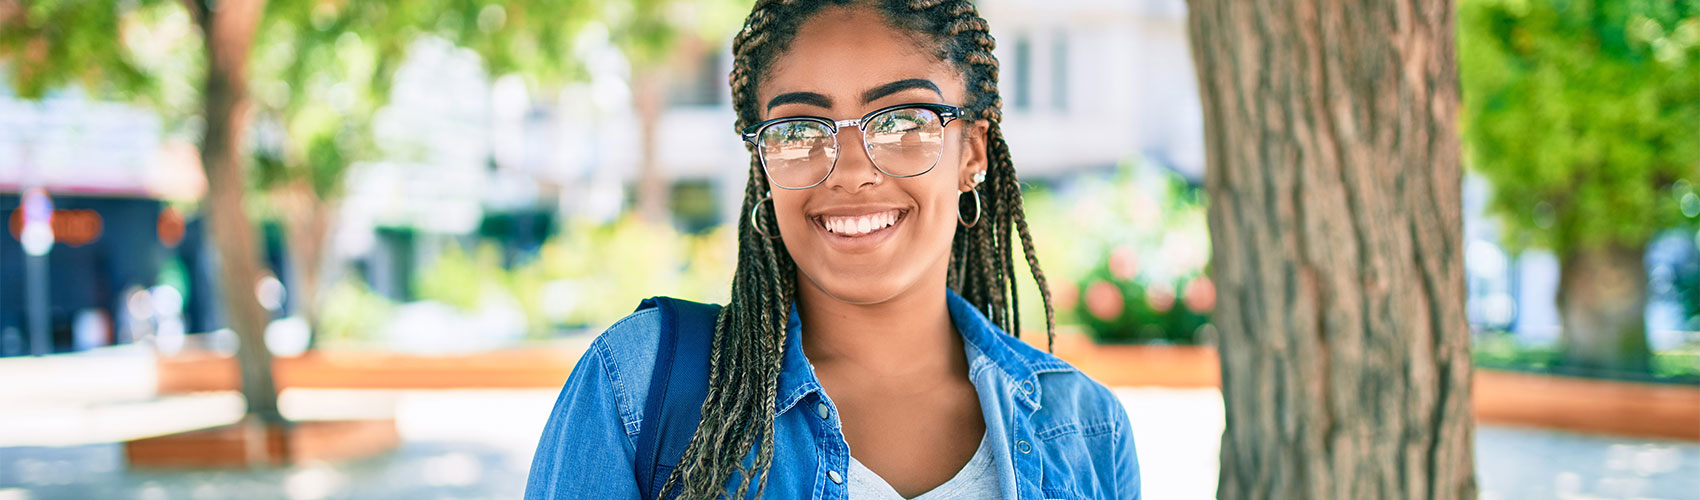 Person wearing glasses, hoop earrings and a denim shirt smiling and looking off to the side in an outdoor setting